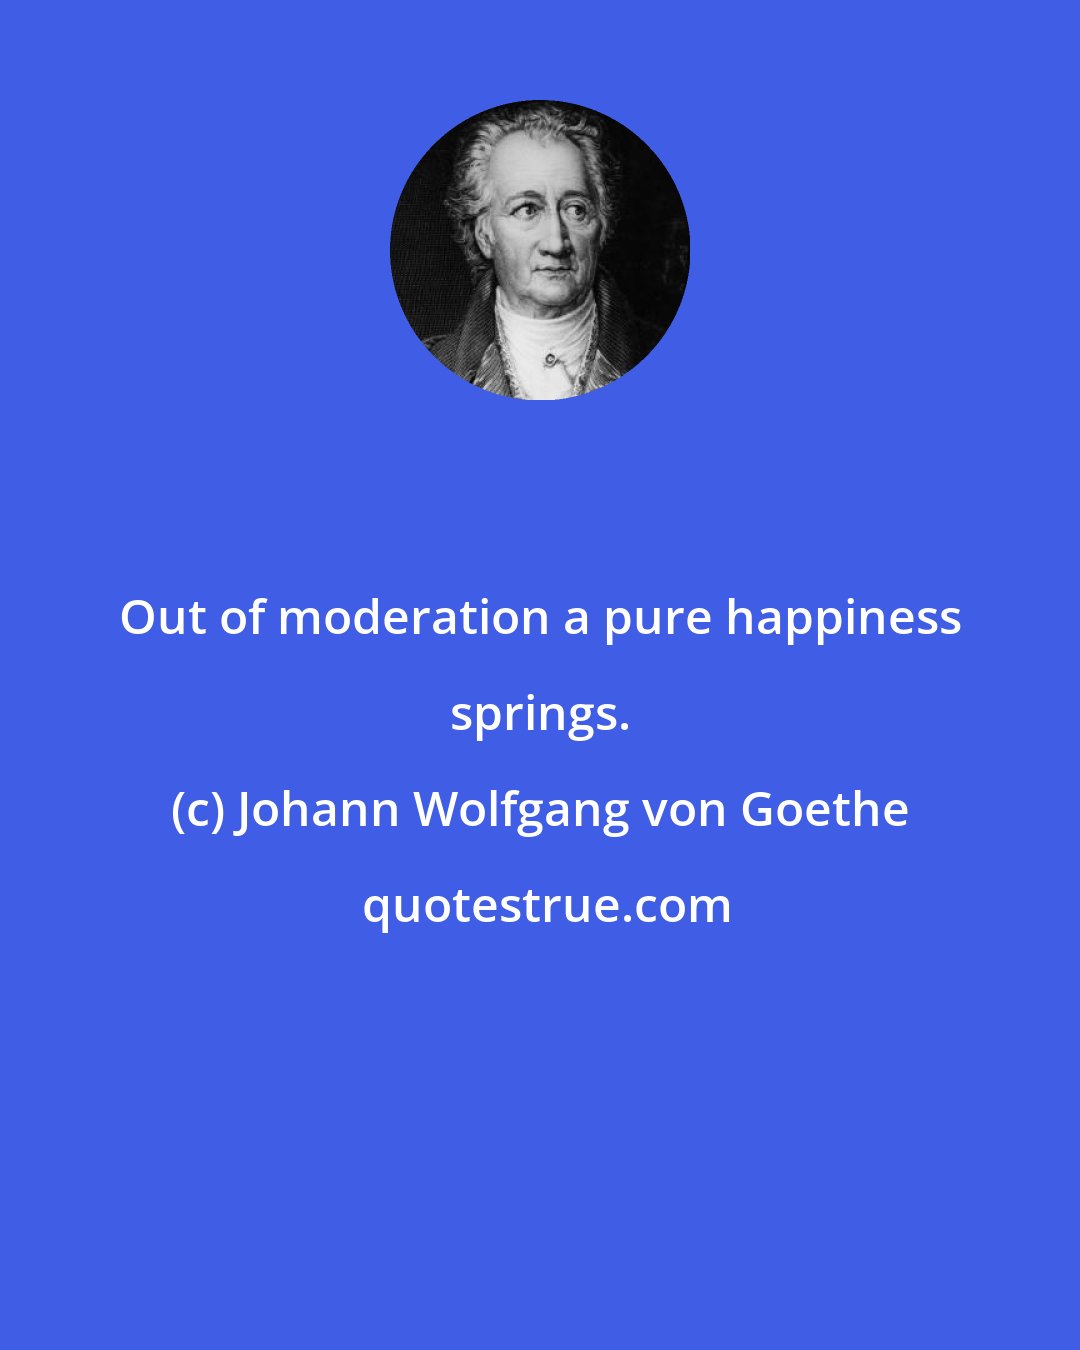 Johann Wolfgang von Goethe: Out of moderation a pure happiness springs.